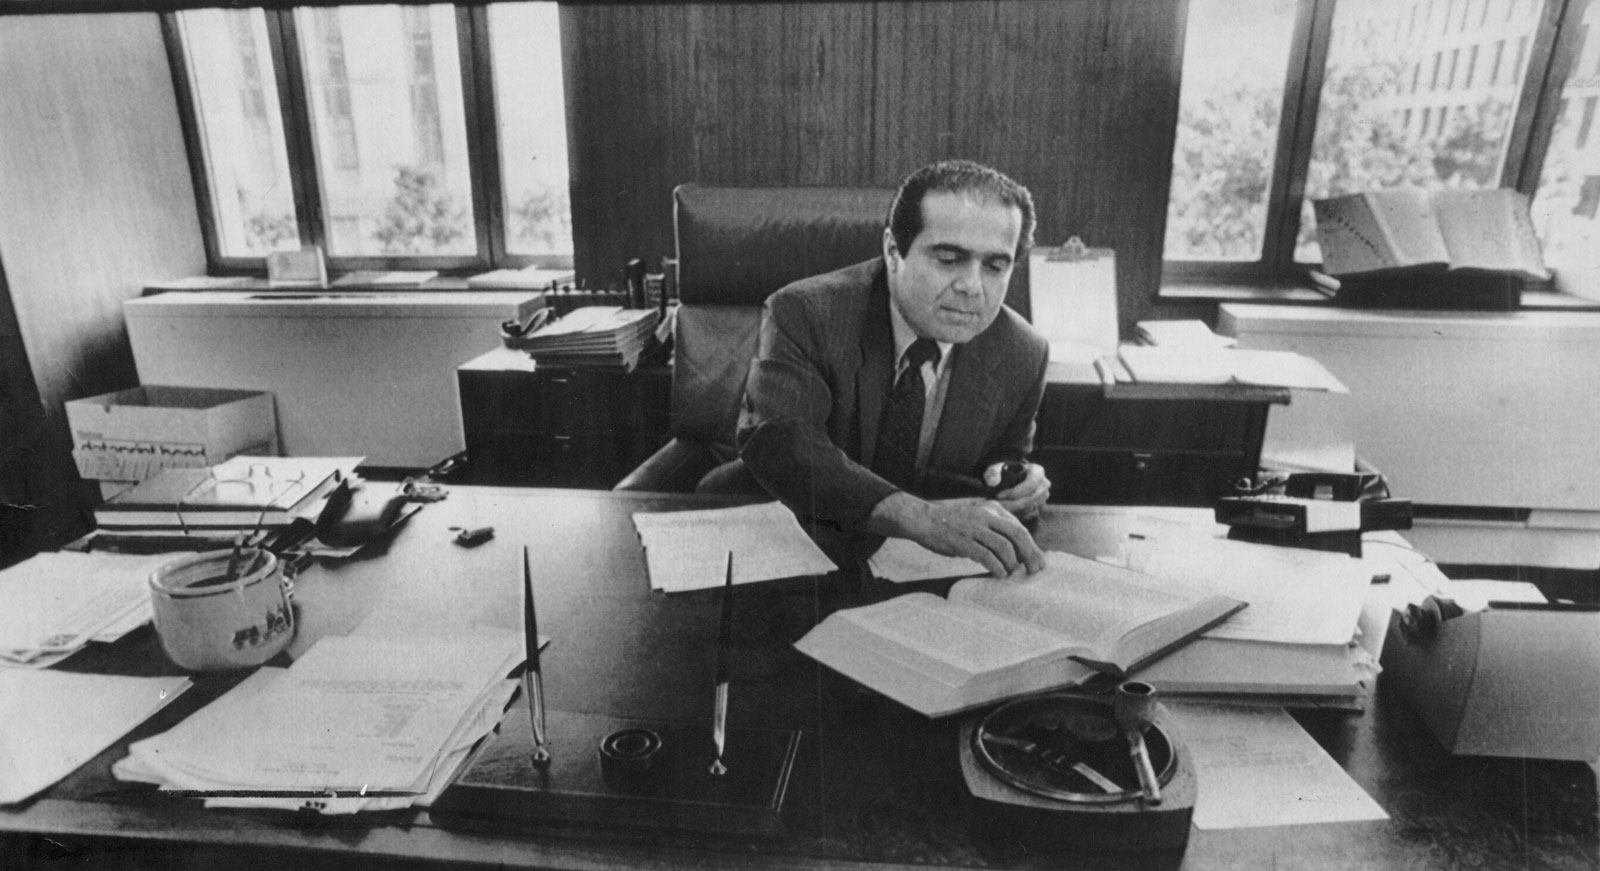 Judge Antonin Scalia, then serving on the United States Court of Appeals in the District of Columbia Circuit, Washington, D.C., July 28, 1986